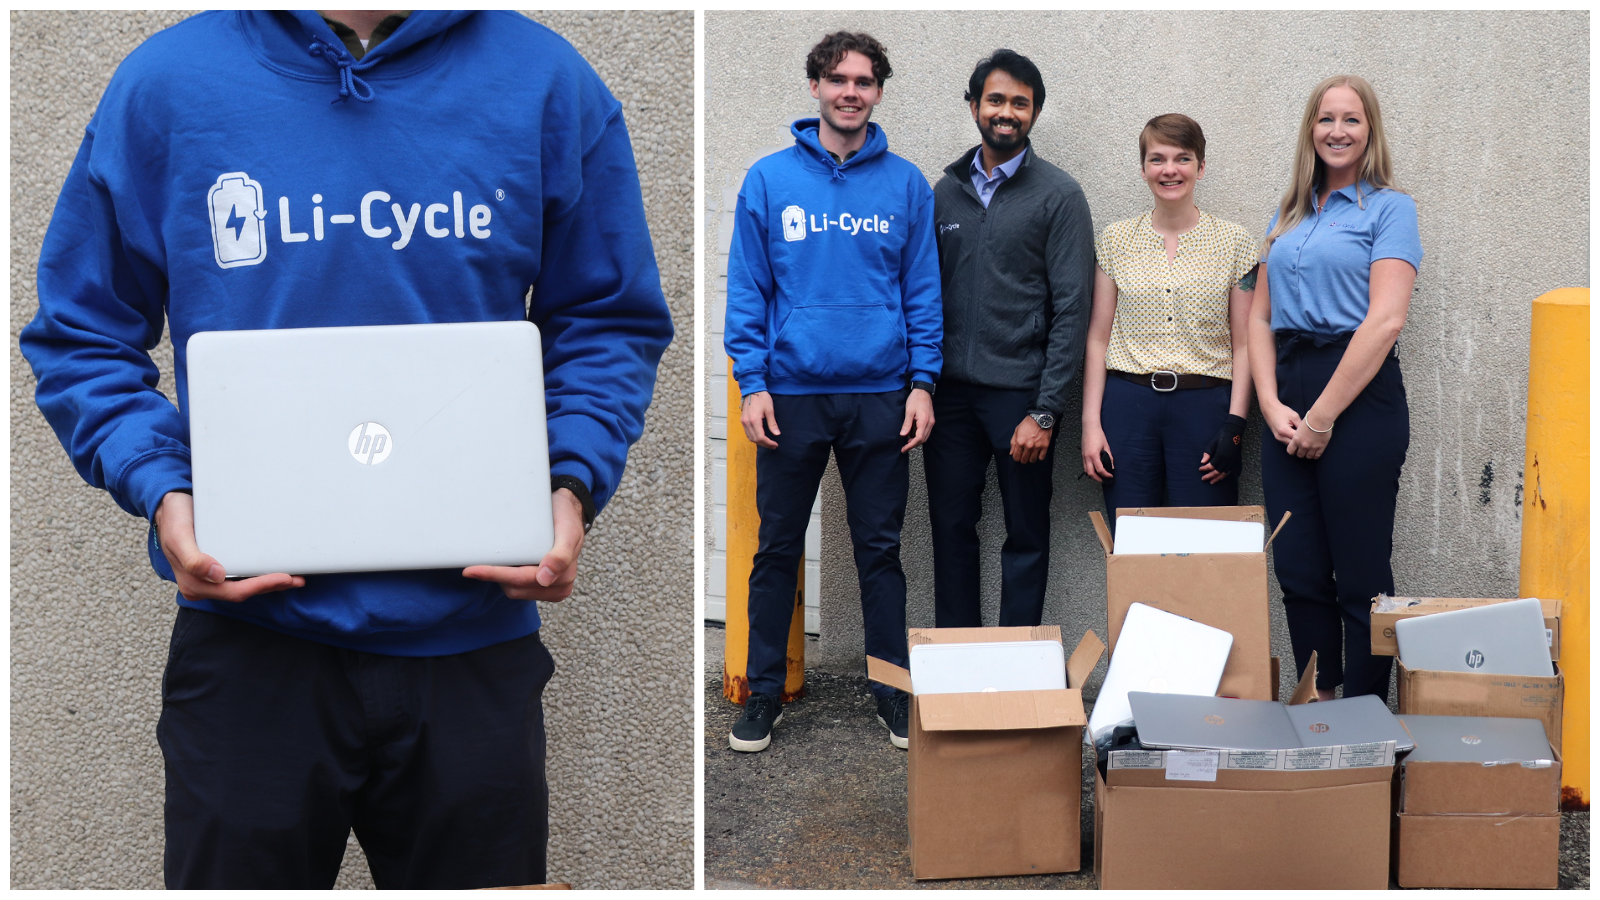 Li-Cycle donates over 30 refurbished laptops to Youth Employment Services